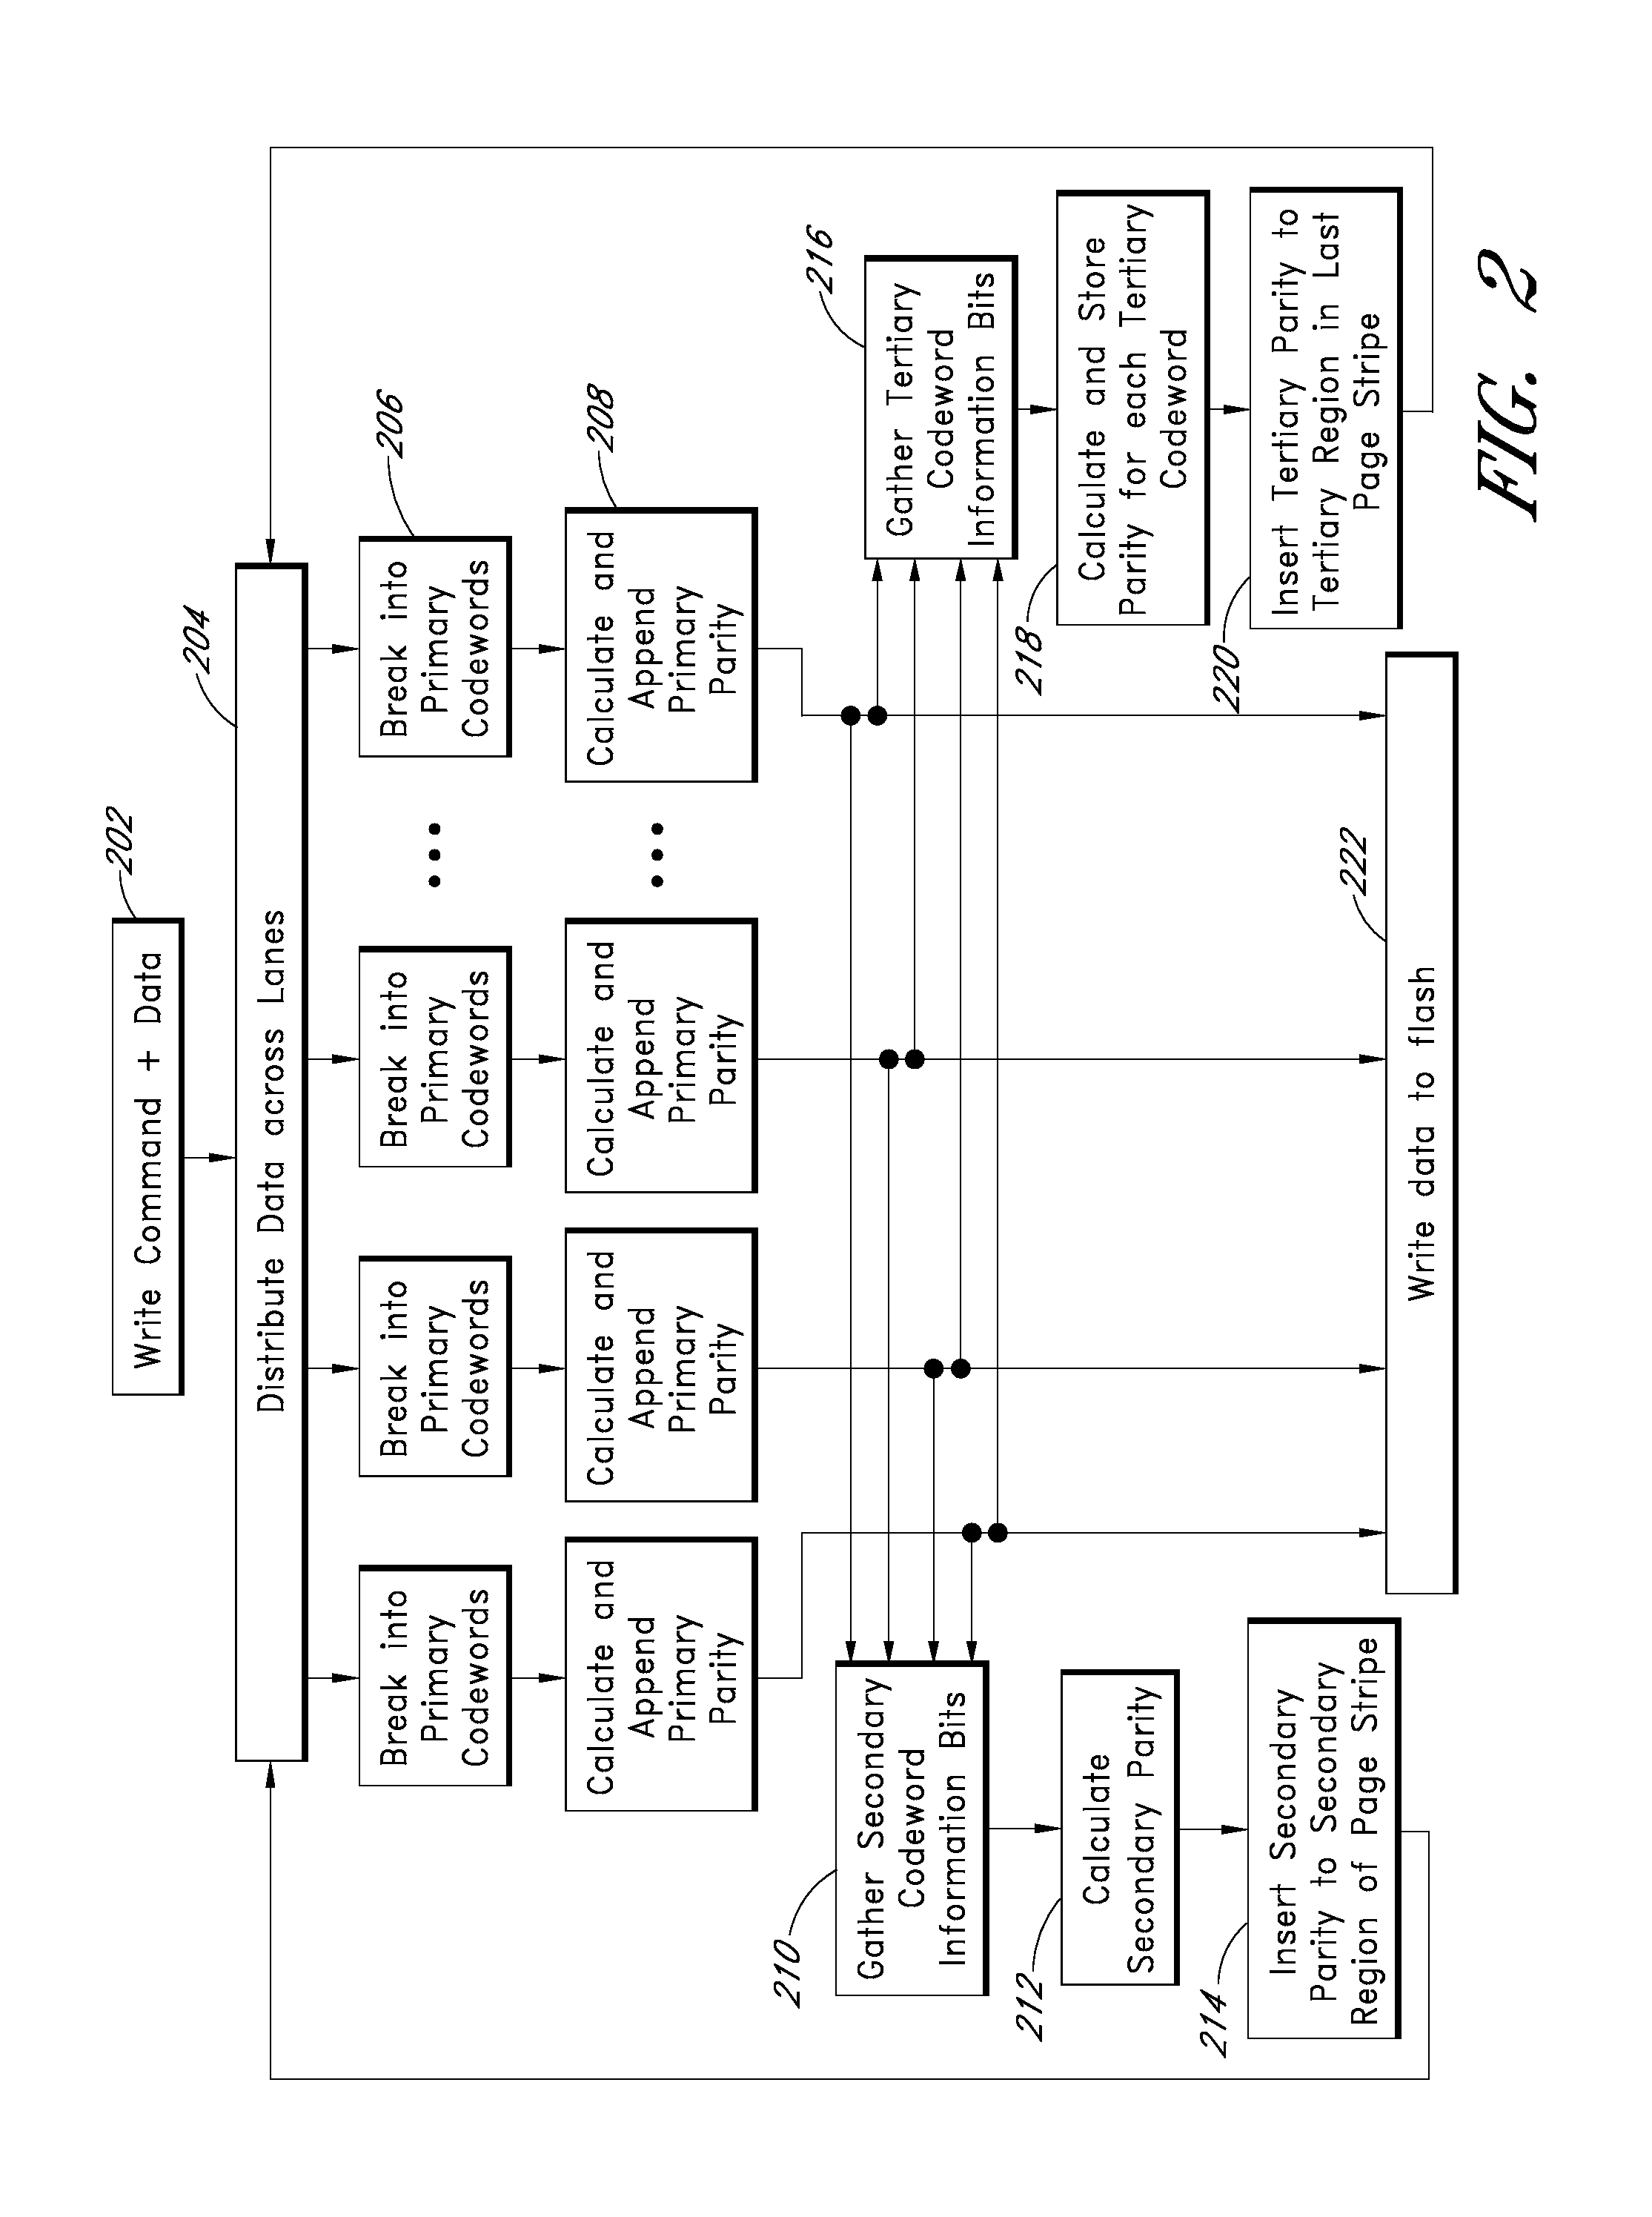 Systems and methods for adaptively selecting among different error correction coding schemes in a flash drive